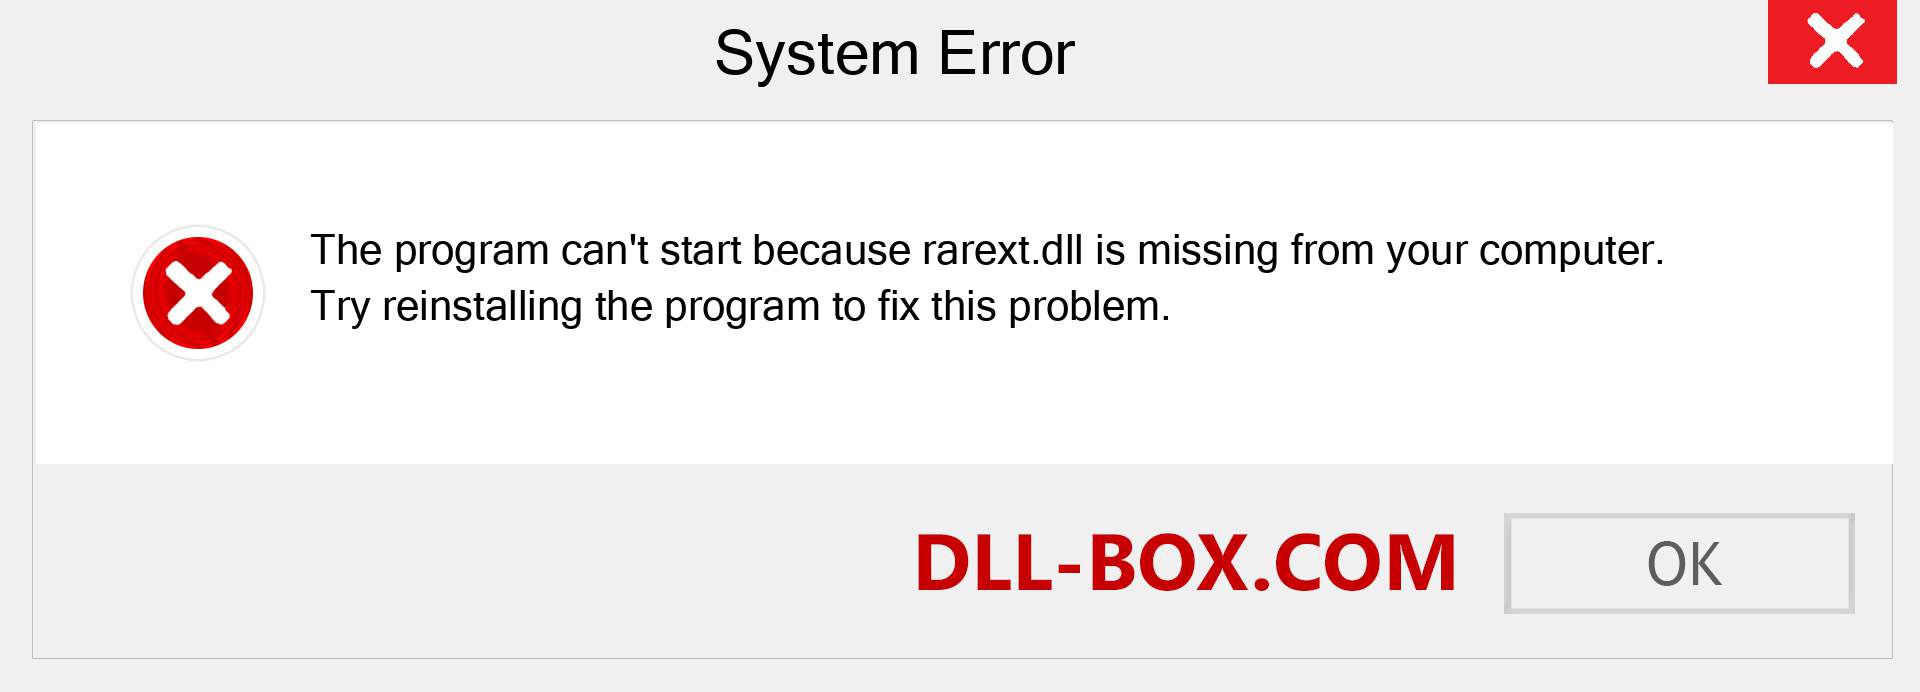  rarext.dll file is missing?. Download for Windows 7, 8, 10 - Fix  rarext dll Missing Error on Windows, photos, images